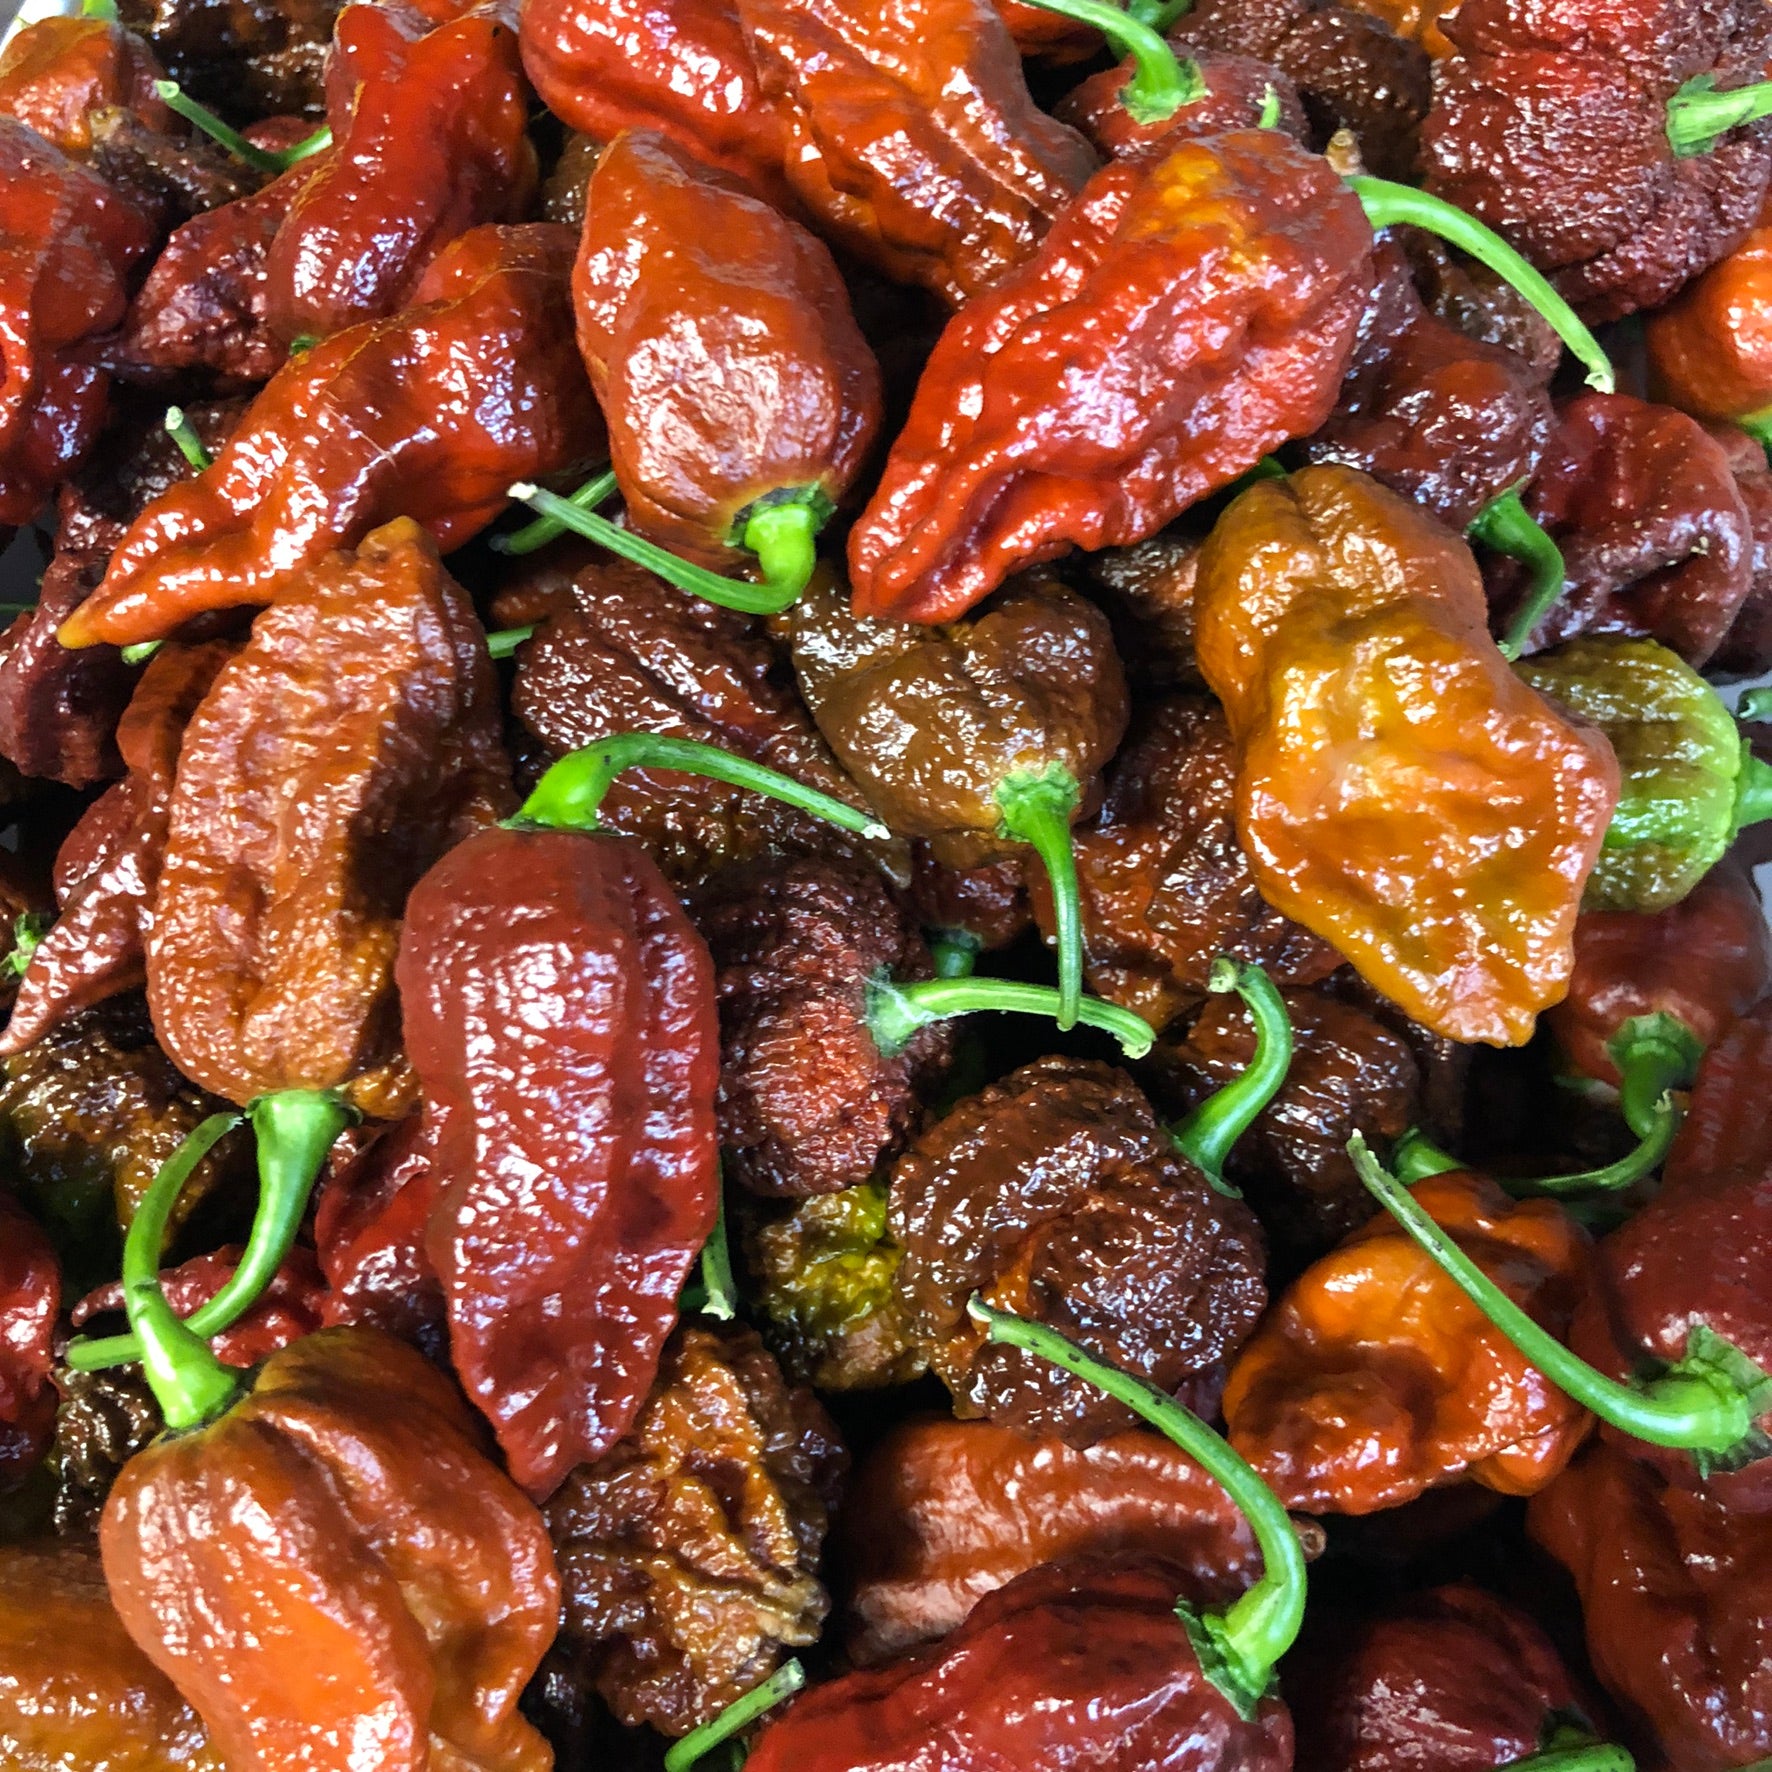 Fresh Super Hot Peppers - Mixed Brown/Chocolate Box: All Brown/Chocolate colored peppers - Bohica Pepper Hut 